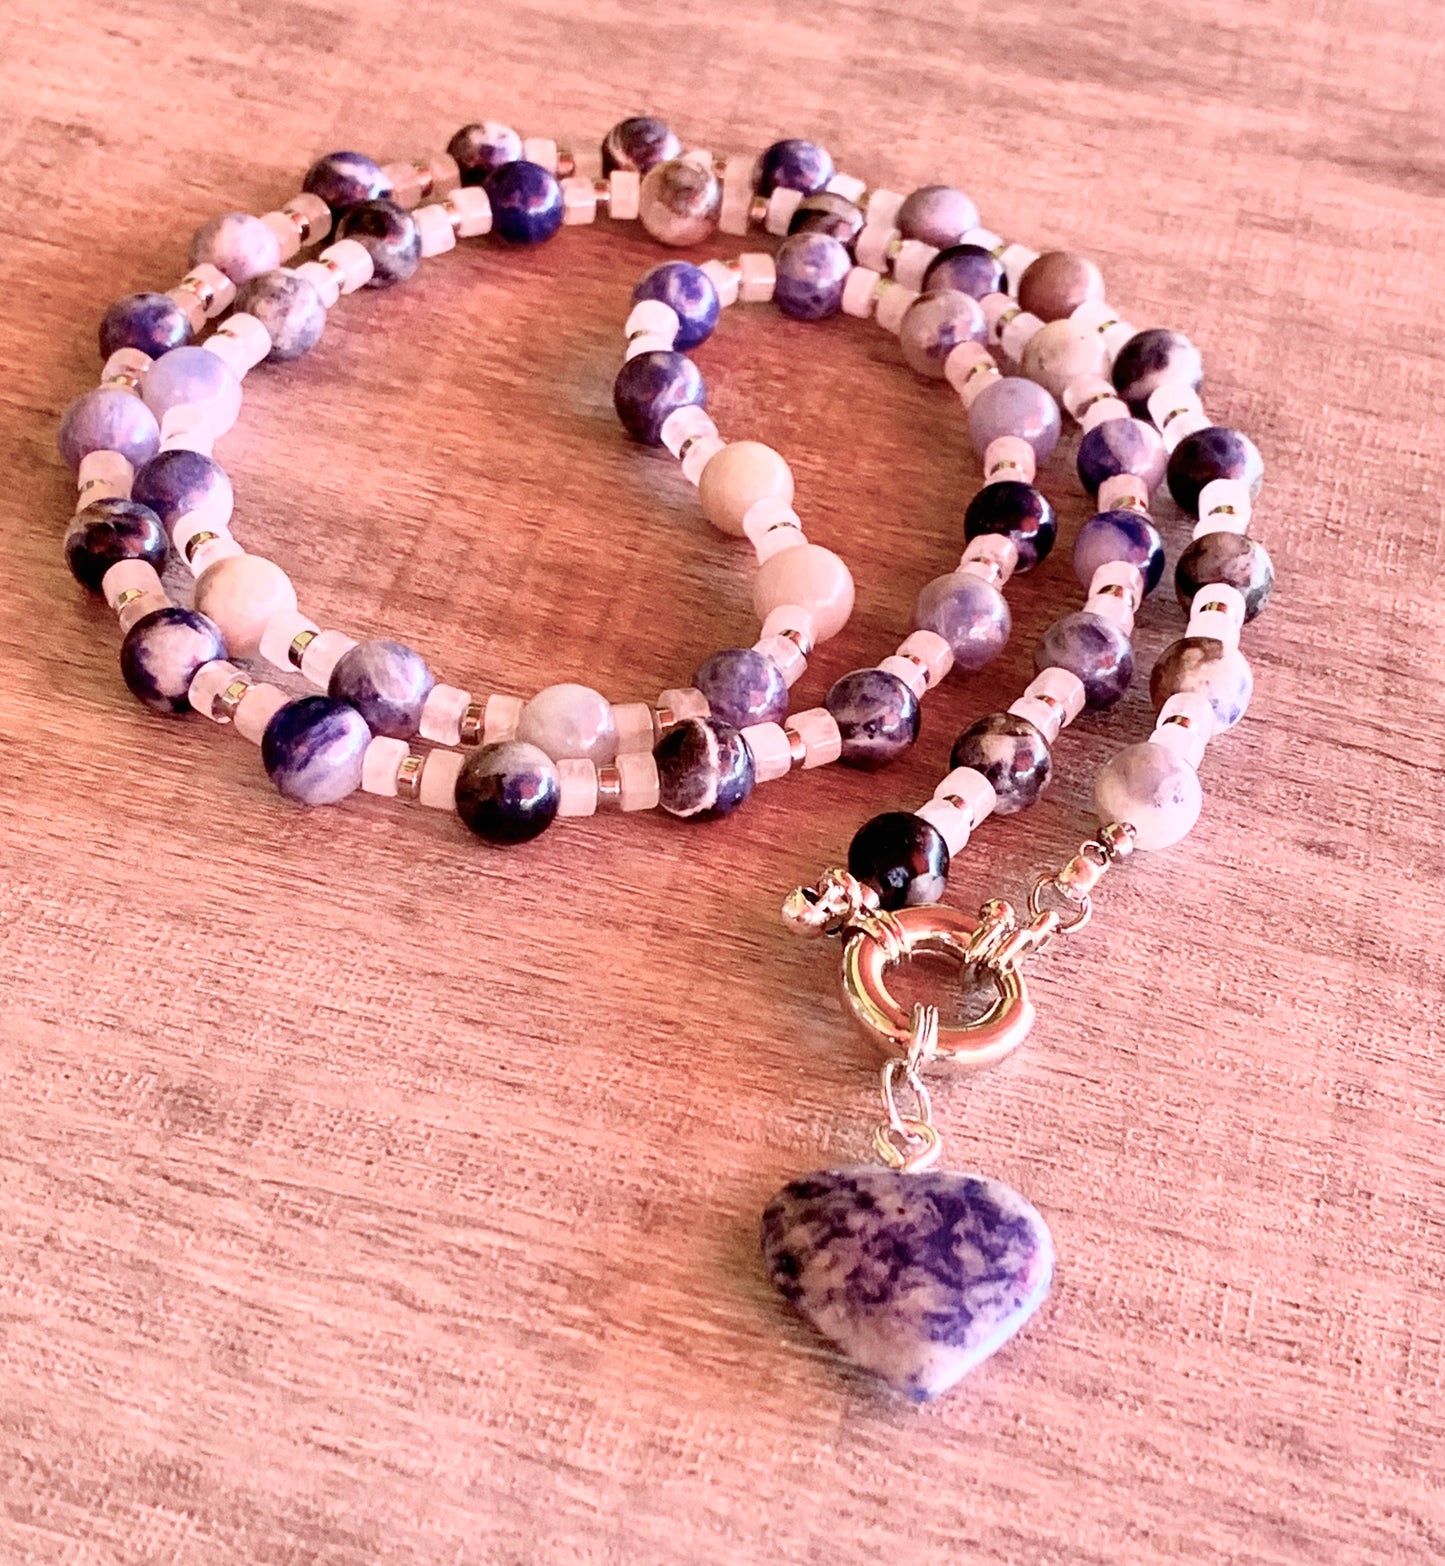 Belinda Handmade Sodalite, Moonstone, and Silver Plated Hematite 30" Necklace with Sodalite Heart Pendant